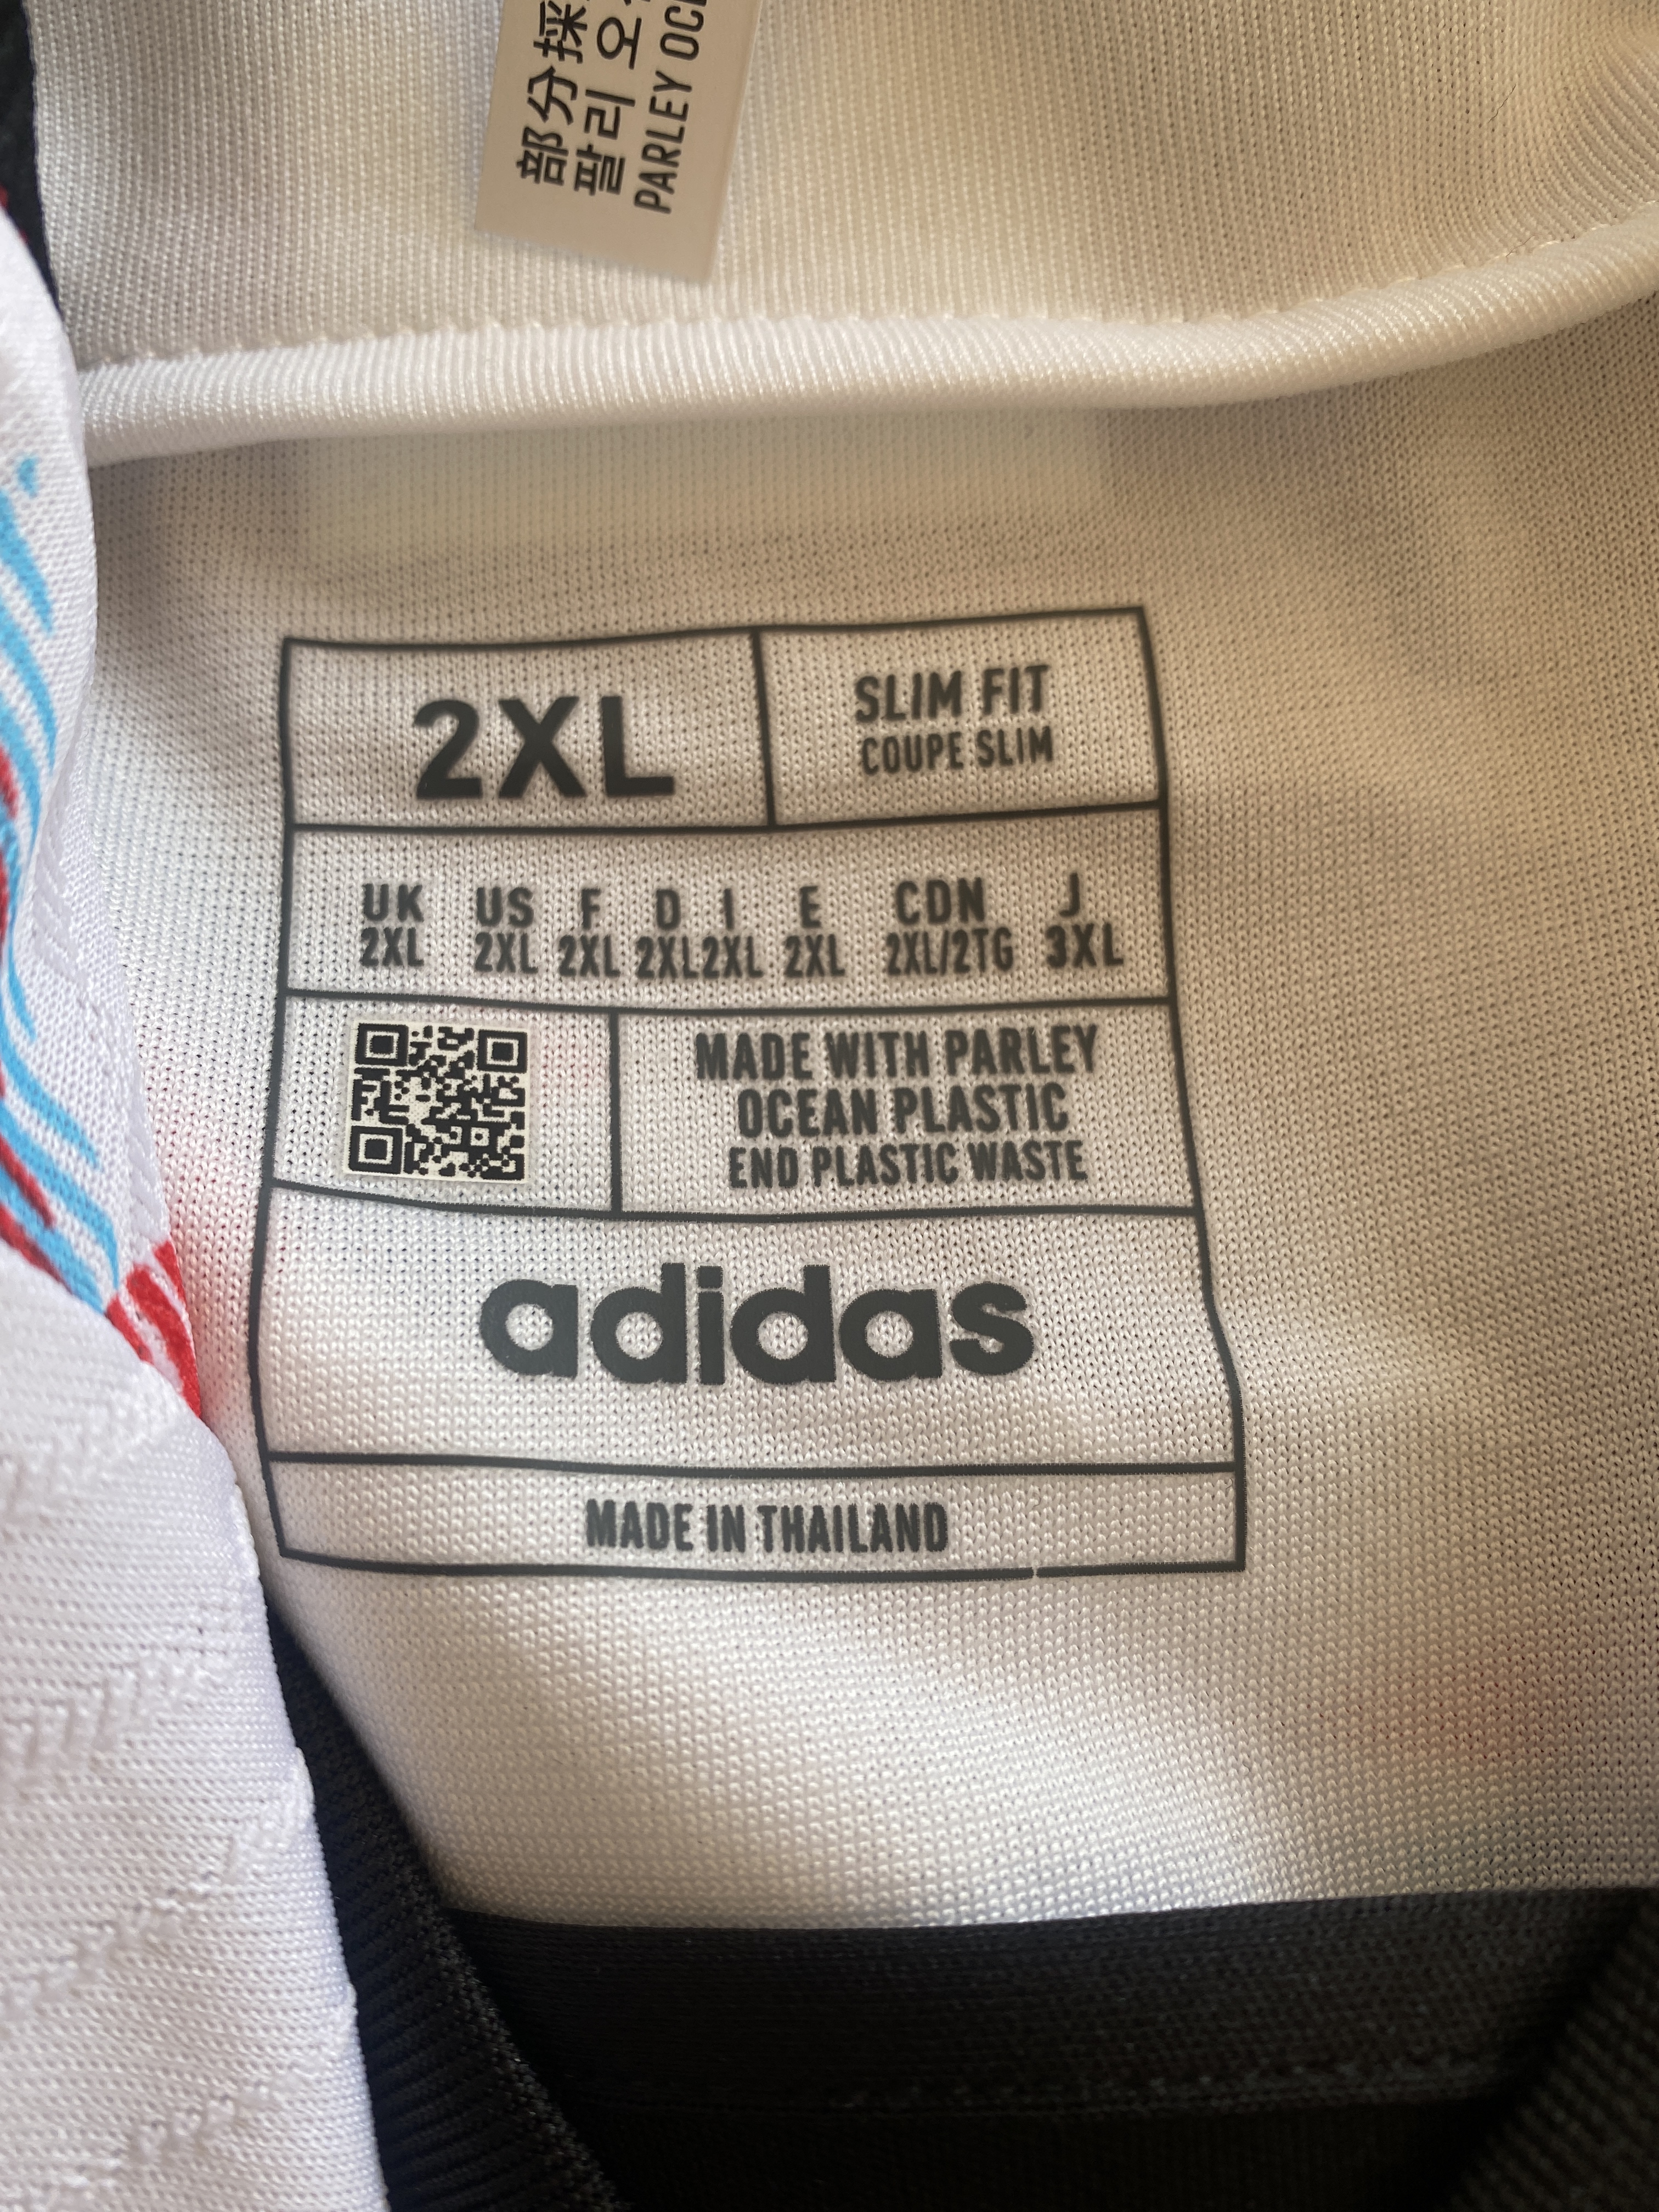 Japan Football Shirts on Twitter: "THREAD: Japan 2022 Adidas shirt (away,  authentic). REAL v FAKE. I managed to get a fake in hand. They are VERY  good copies, be careful out there.